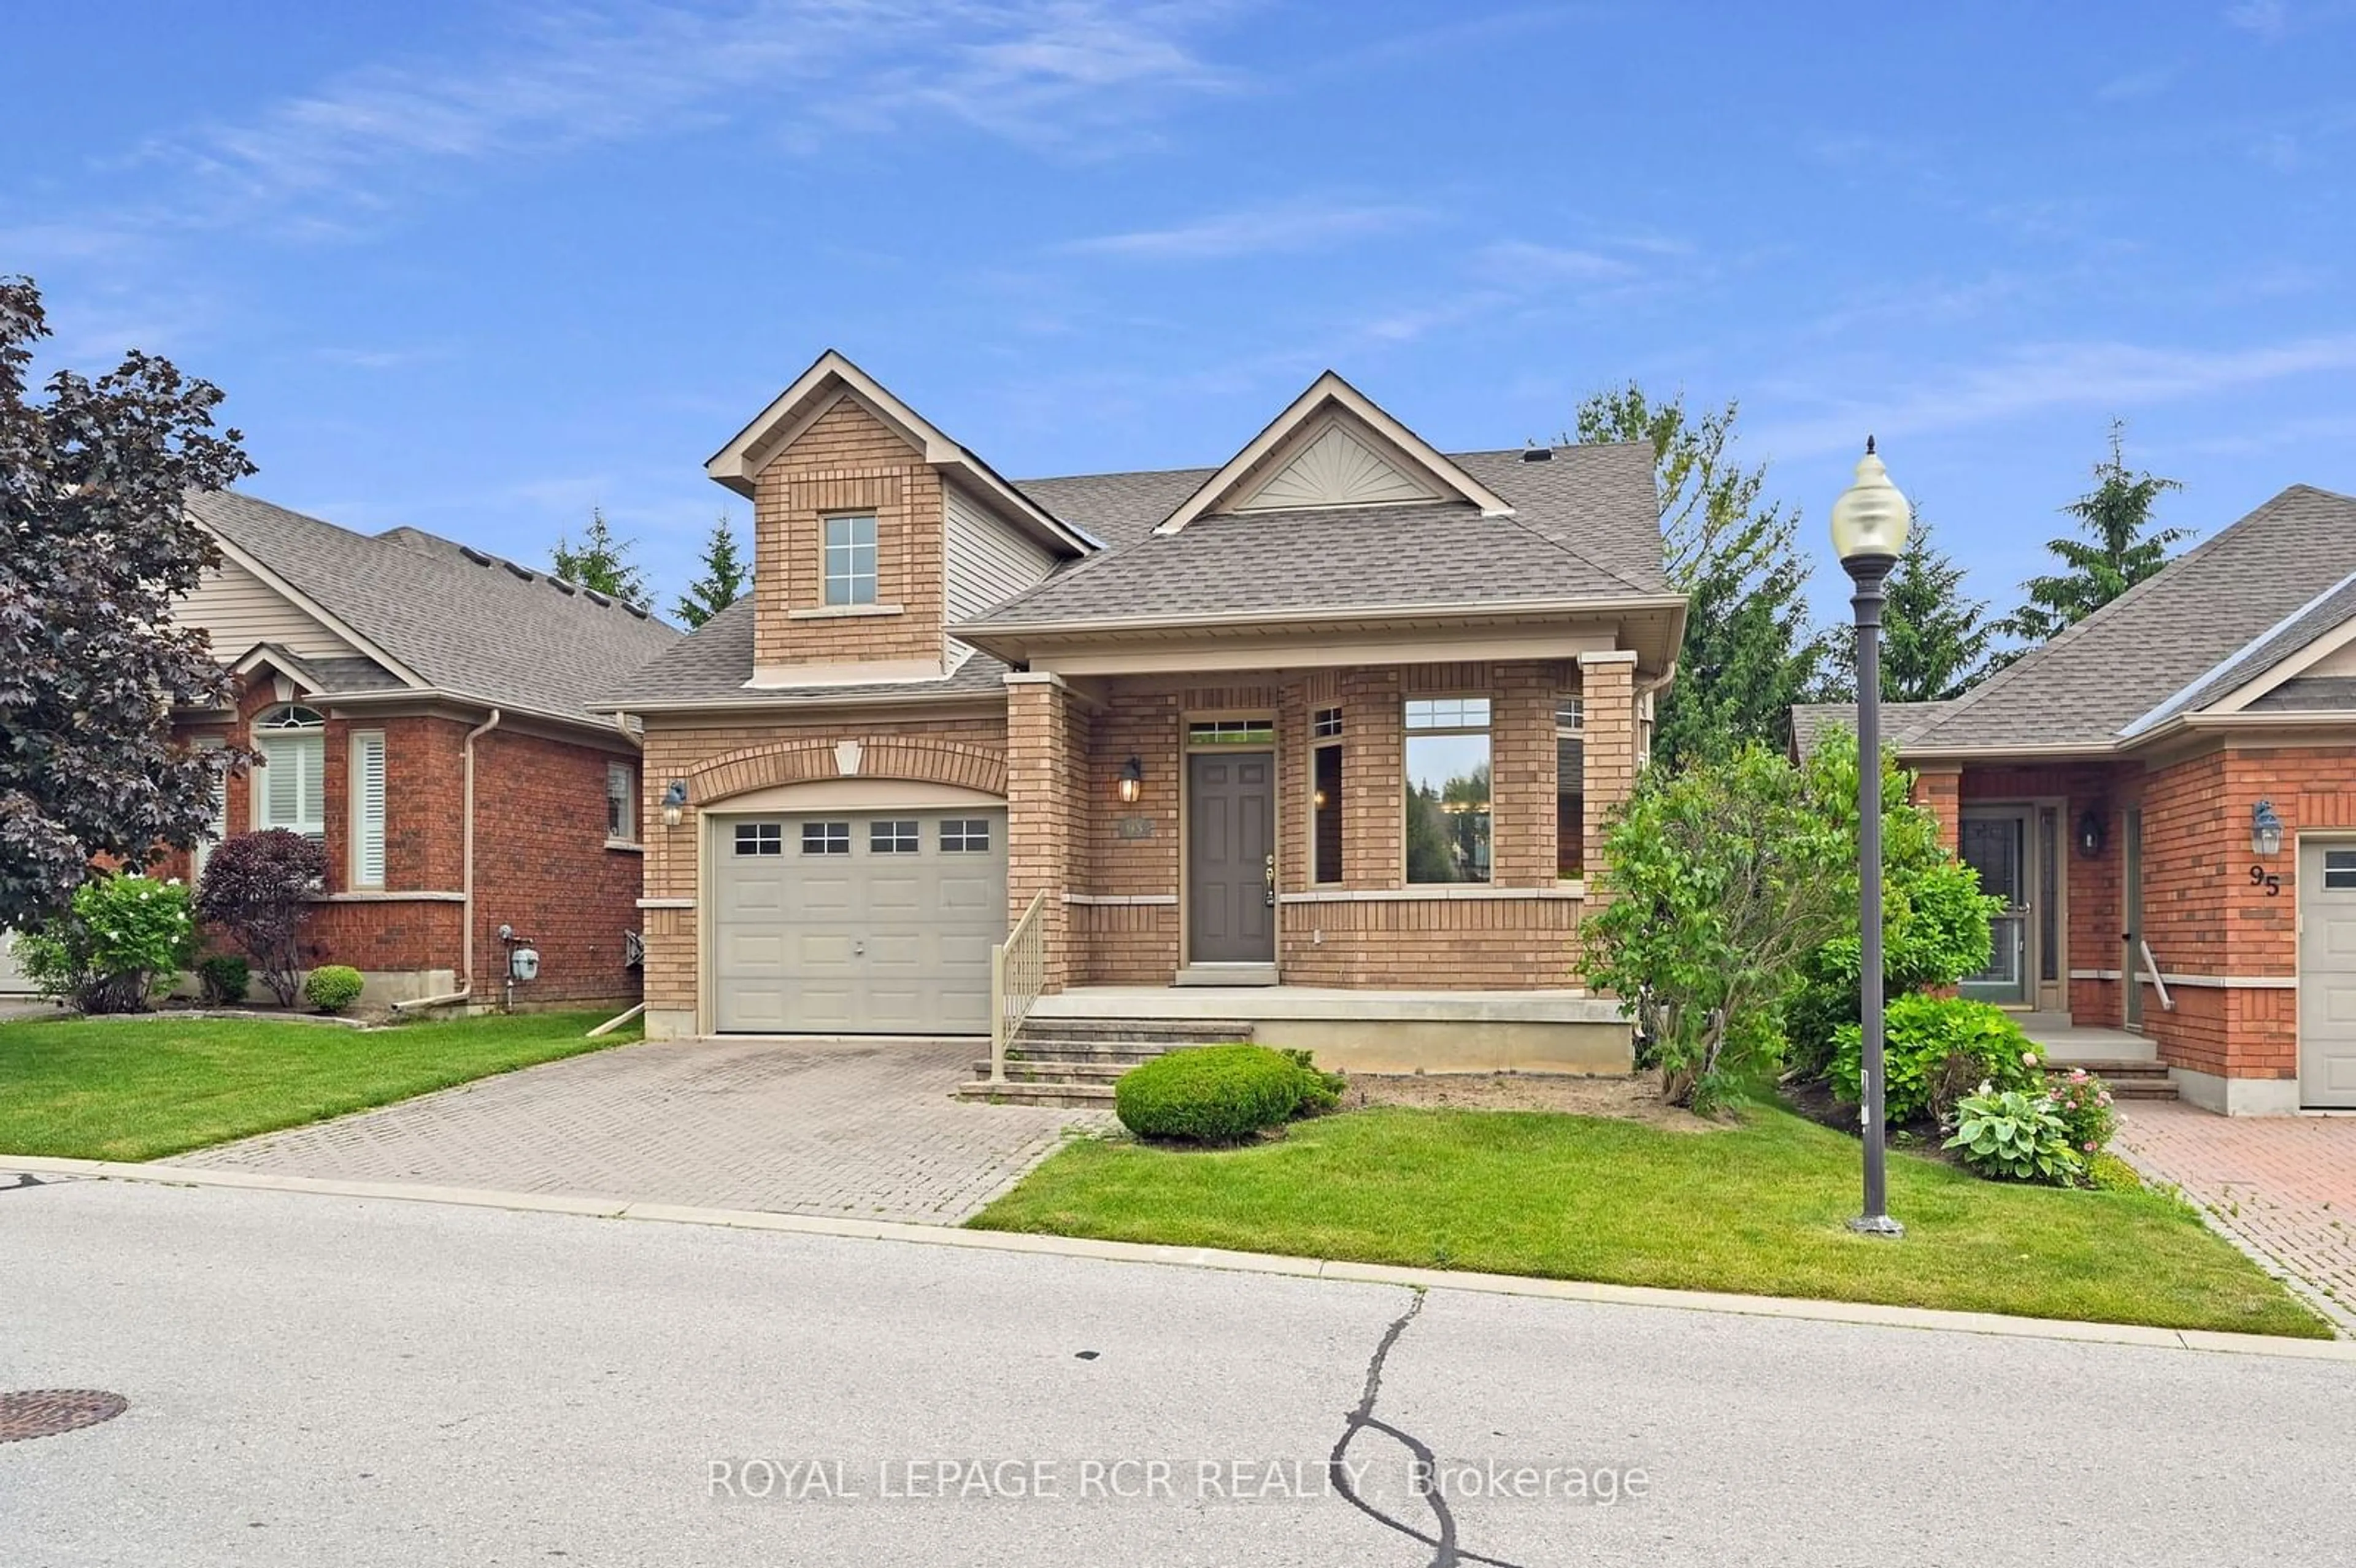 Home with brick exterior material for 93 Sunset Blvd, New Tecumseth Ontario L9R 2G9